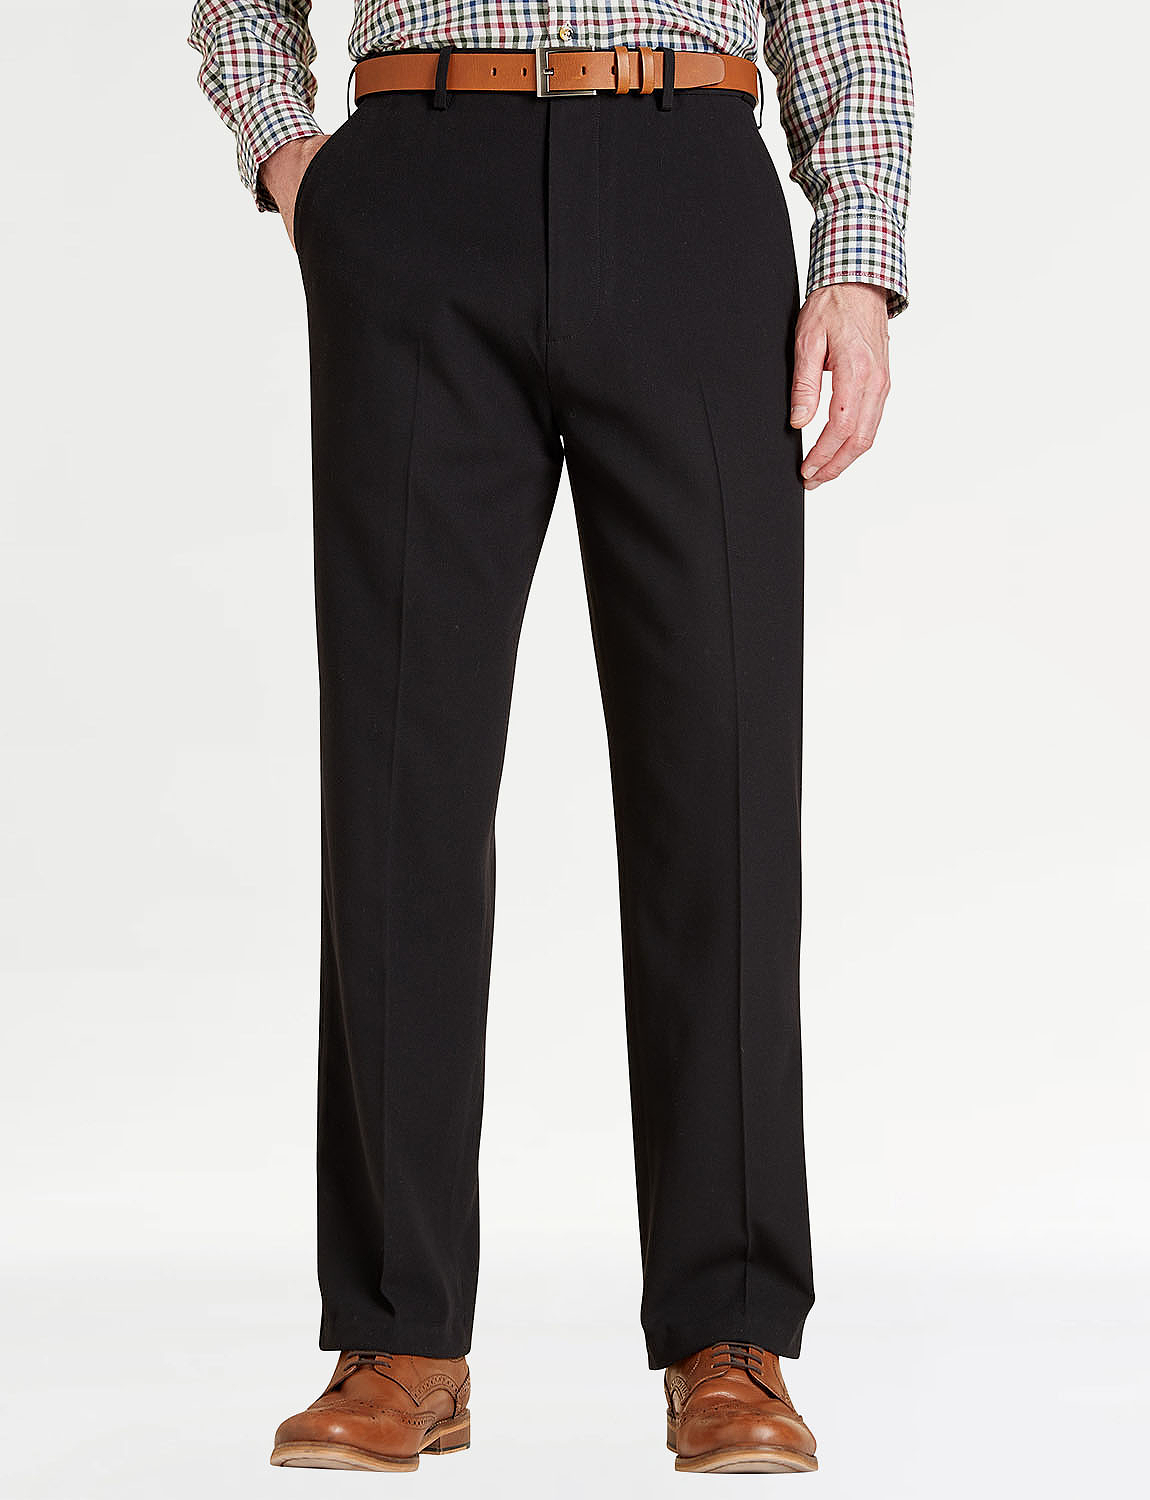 Pegasus Stretch Wool Touch Trouser With Hidden Stretch | Chums